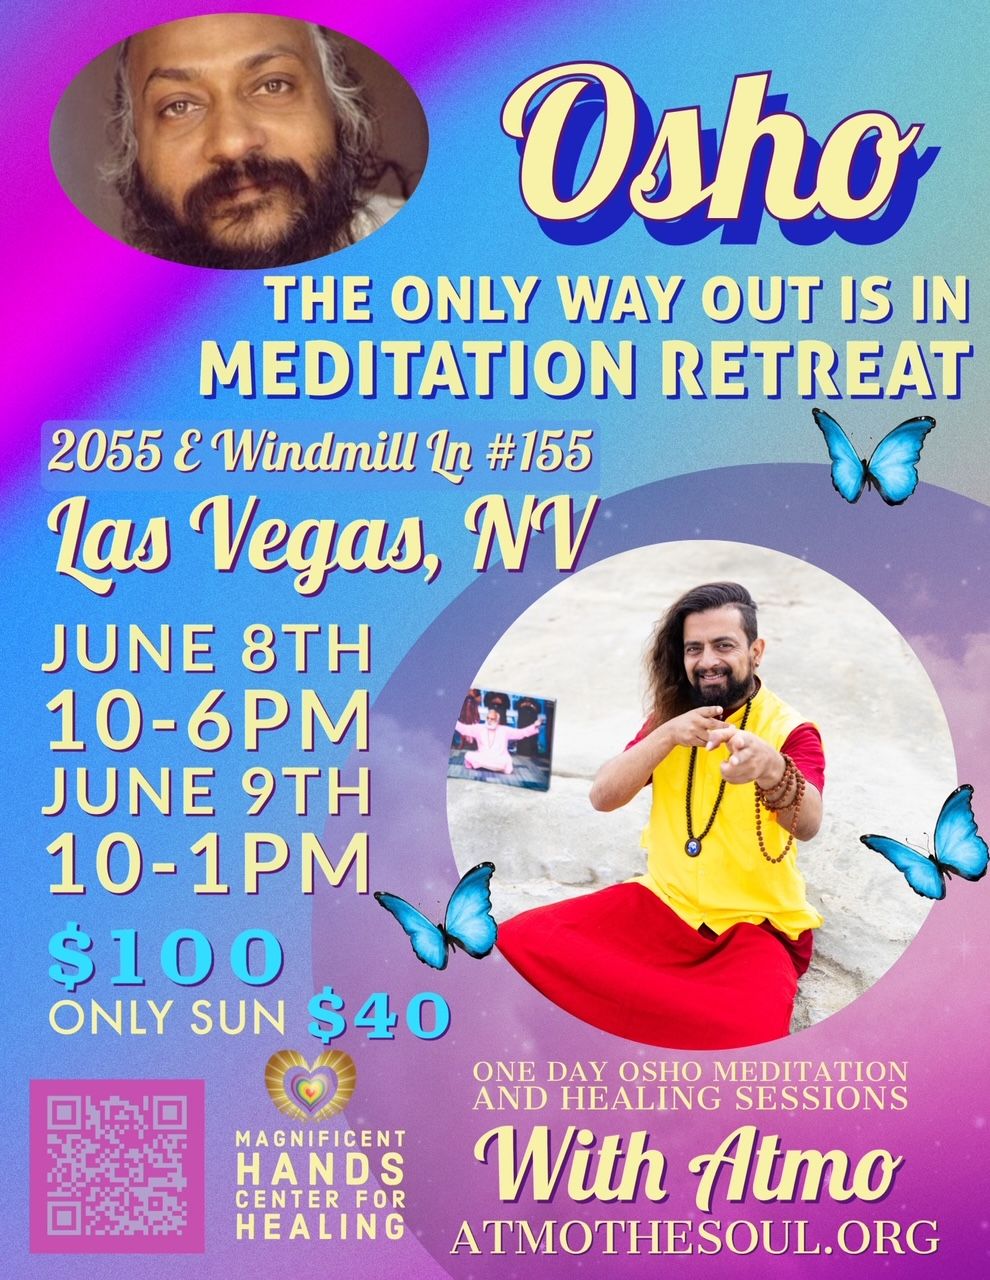 Osho meditations and healing sessions with Atmo in Las Vegas